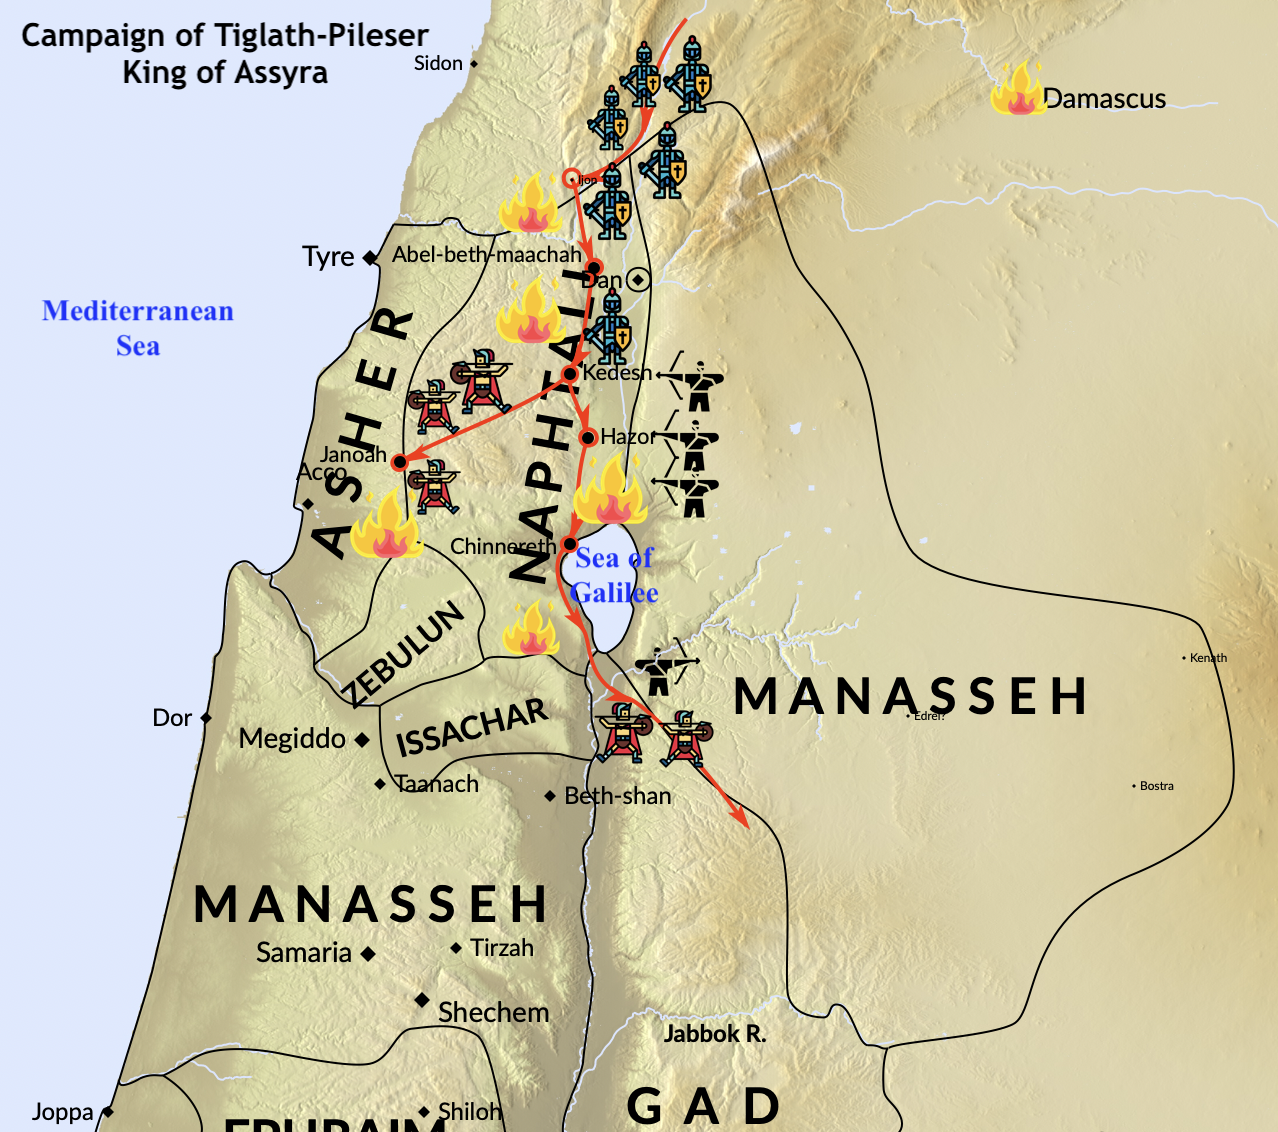 A map of the campaign of Tiglath-Pileser into the kingdom of Israel. The tribe of Dan, with the other northern tribes, were exiled and melted into history.